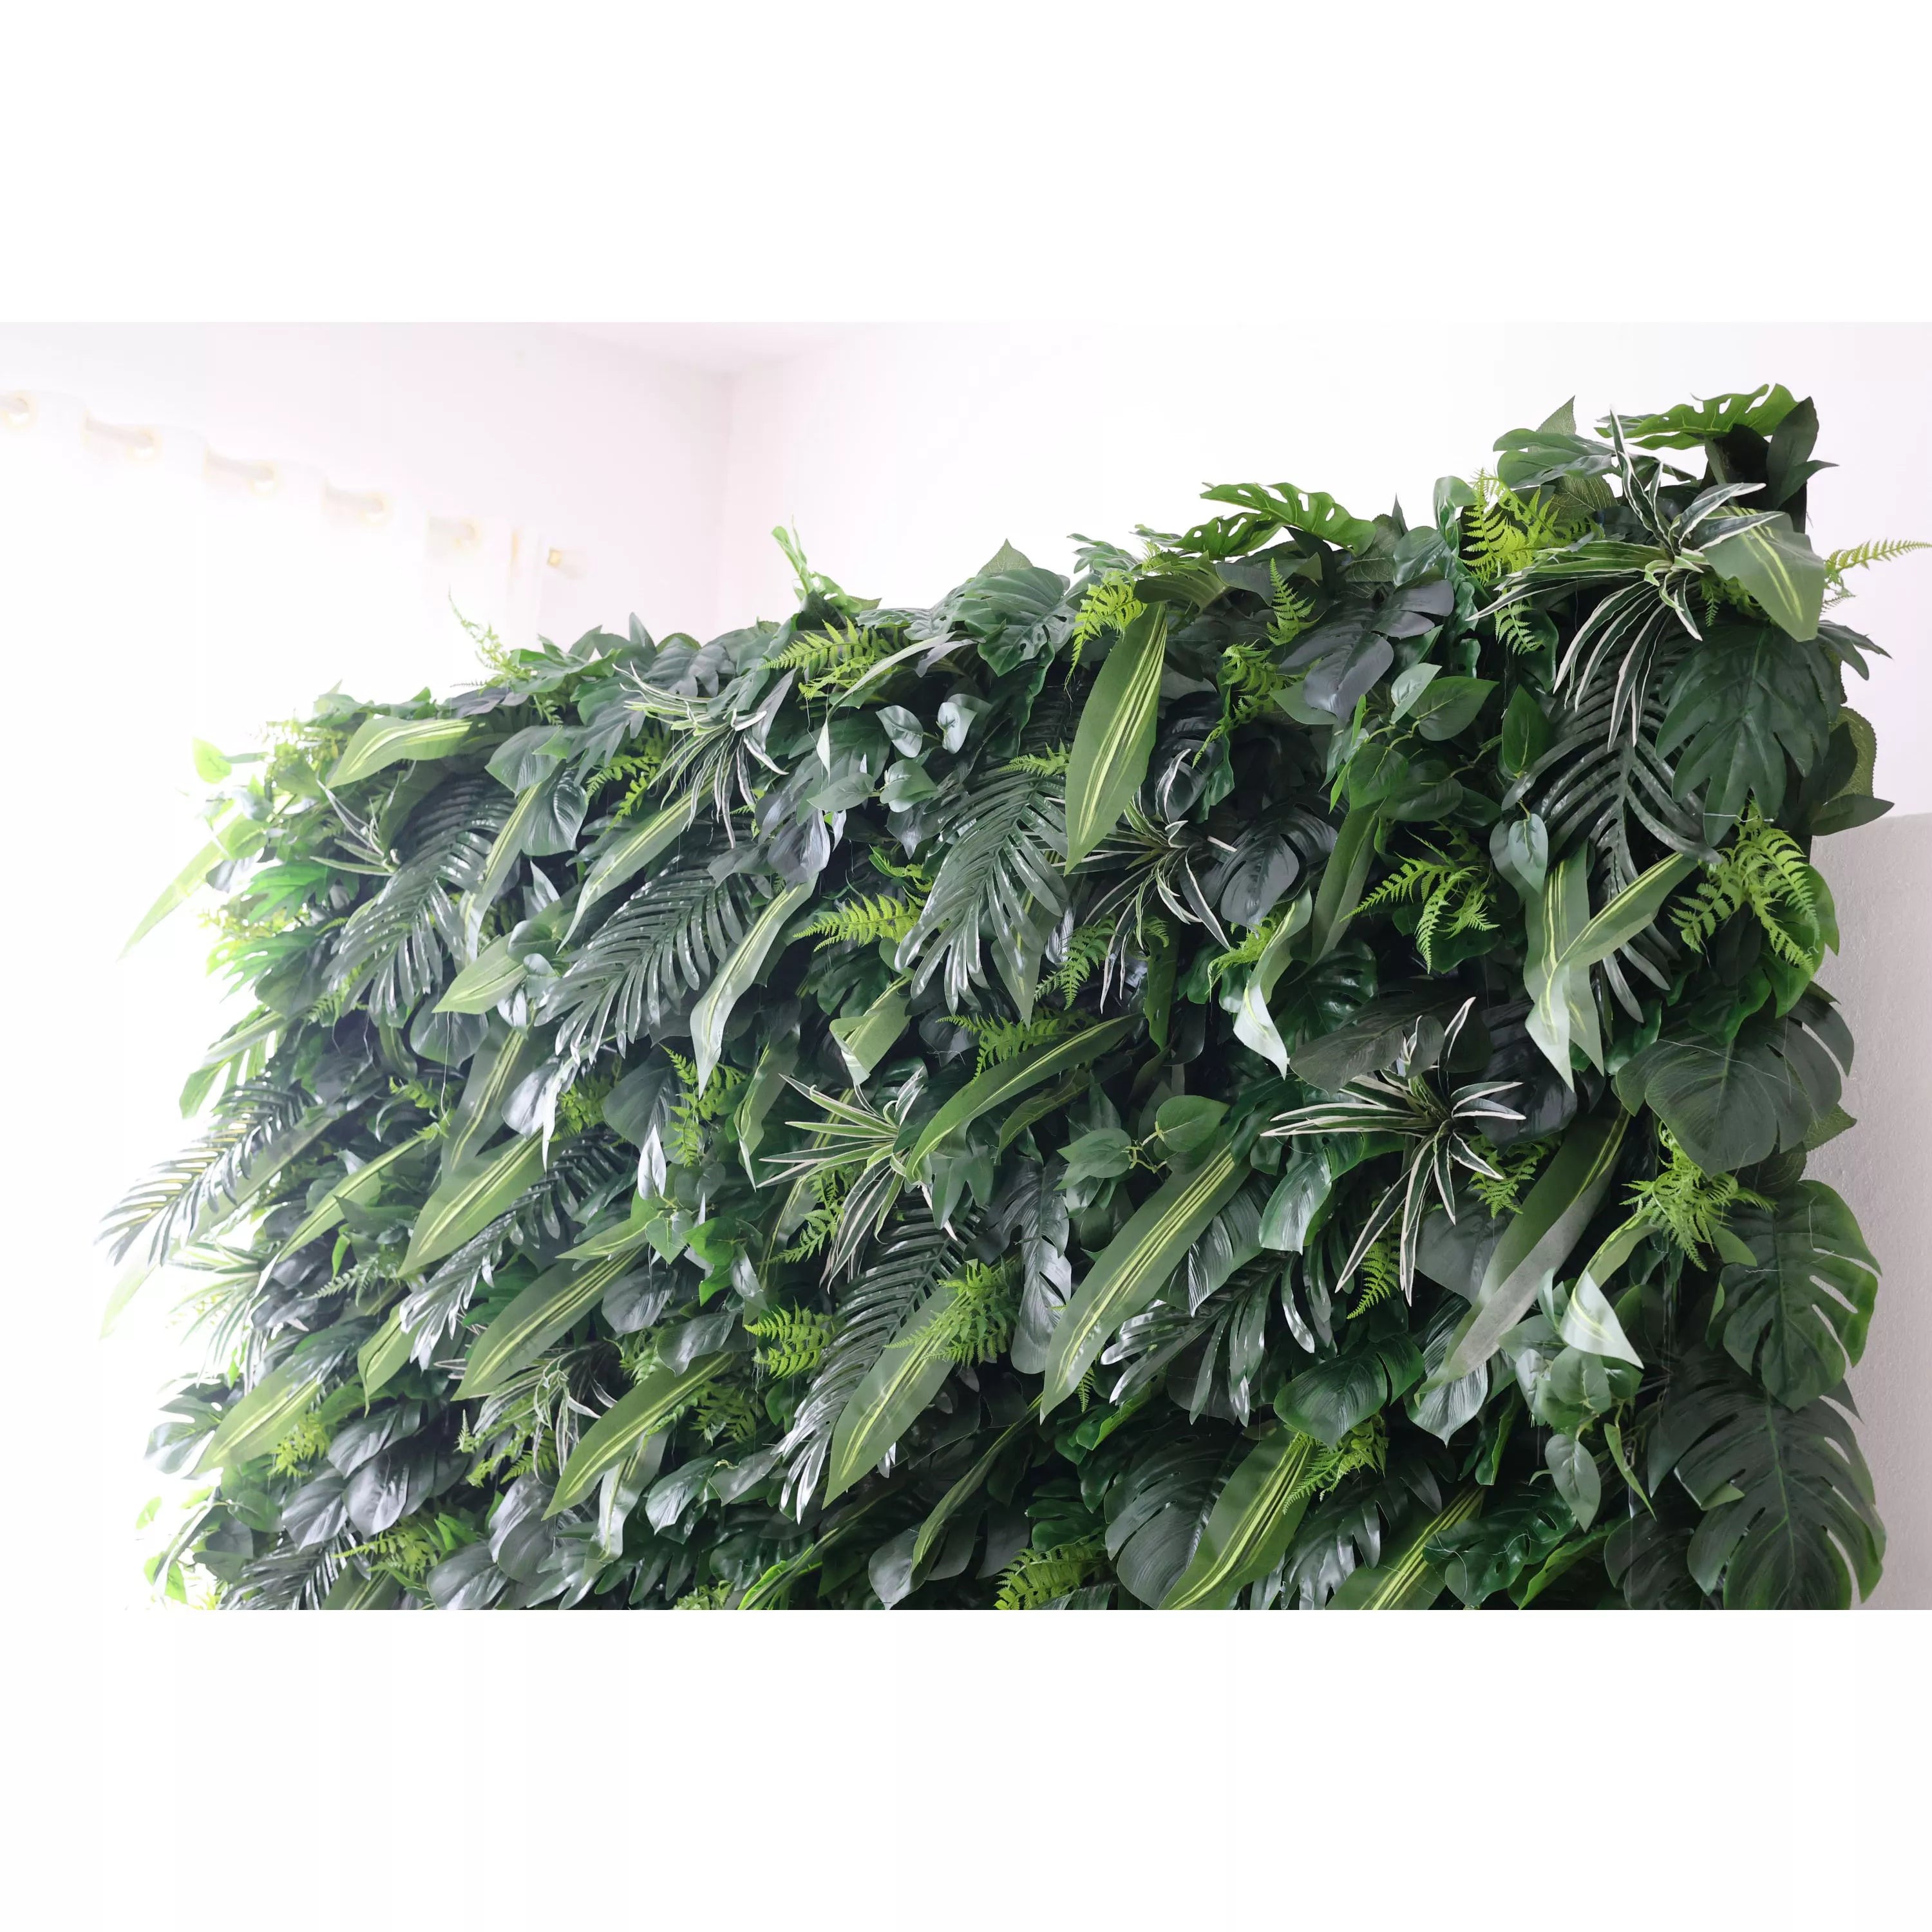 Valar Flower Roll Up Artificial Plant Wall Backdrop: Verdant Rainforest - Immersive Greenery for Any Event-VF-240